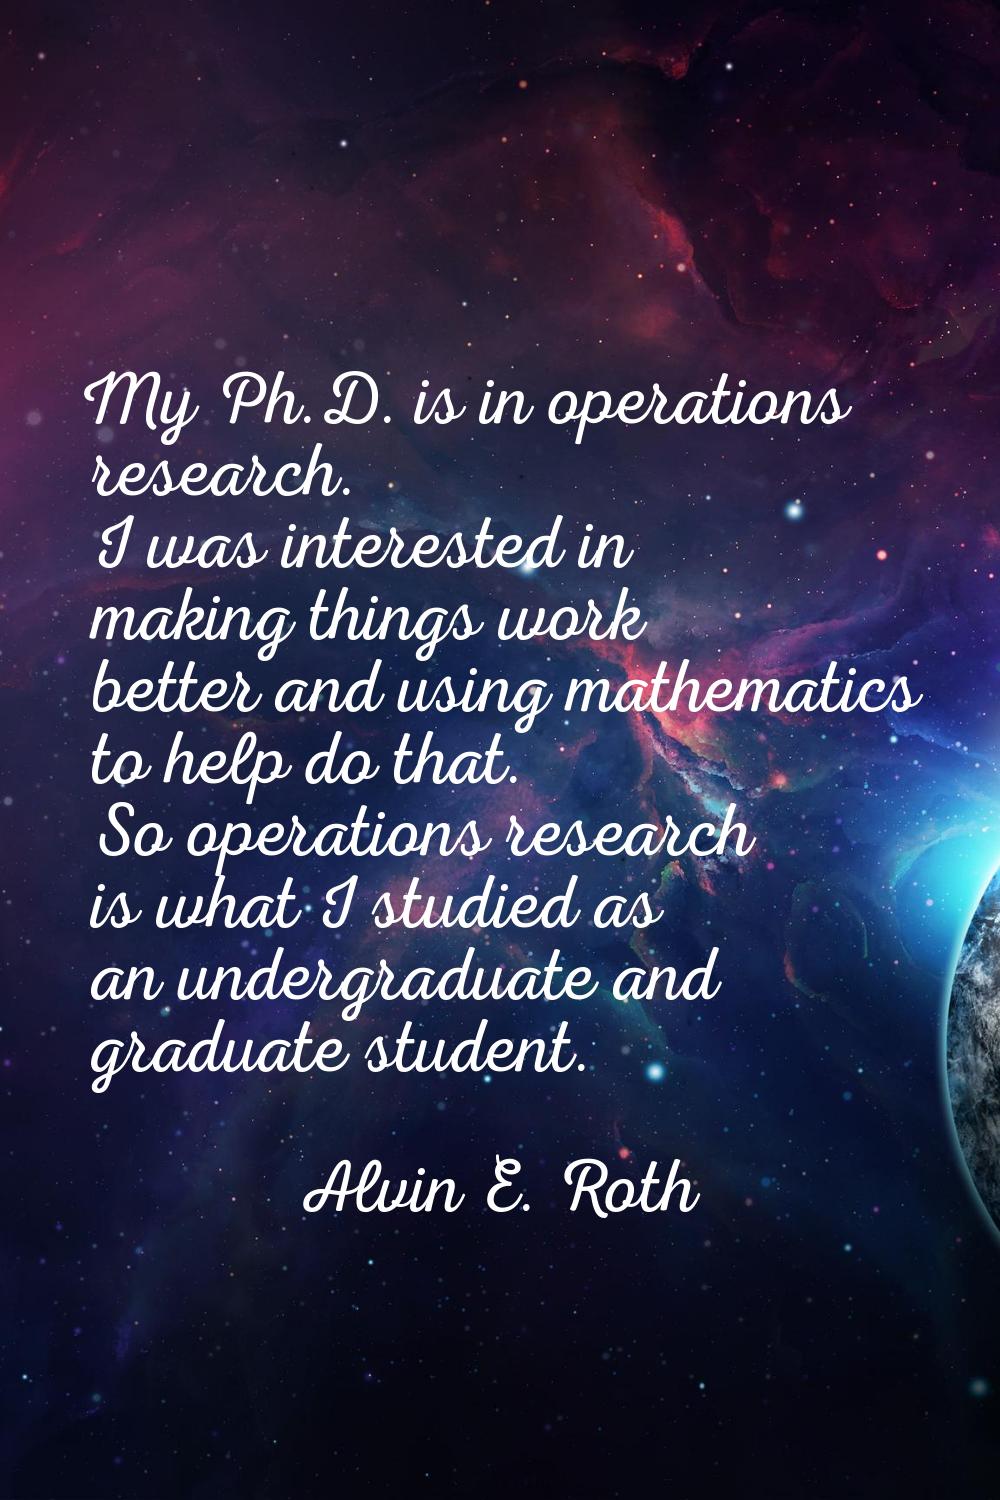 My Ph.D. is in operations research. I was interested in making things work better and using mathema